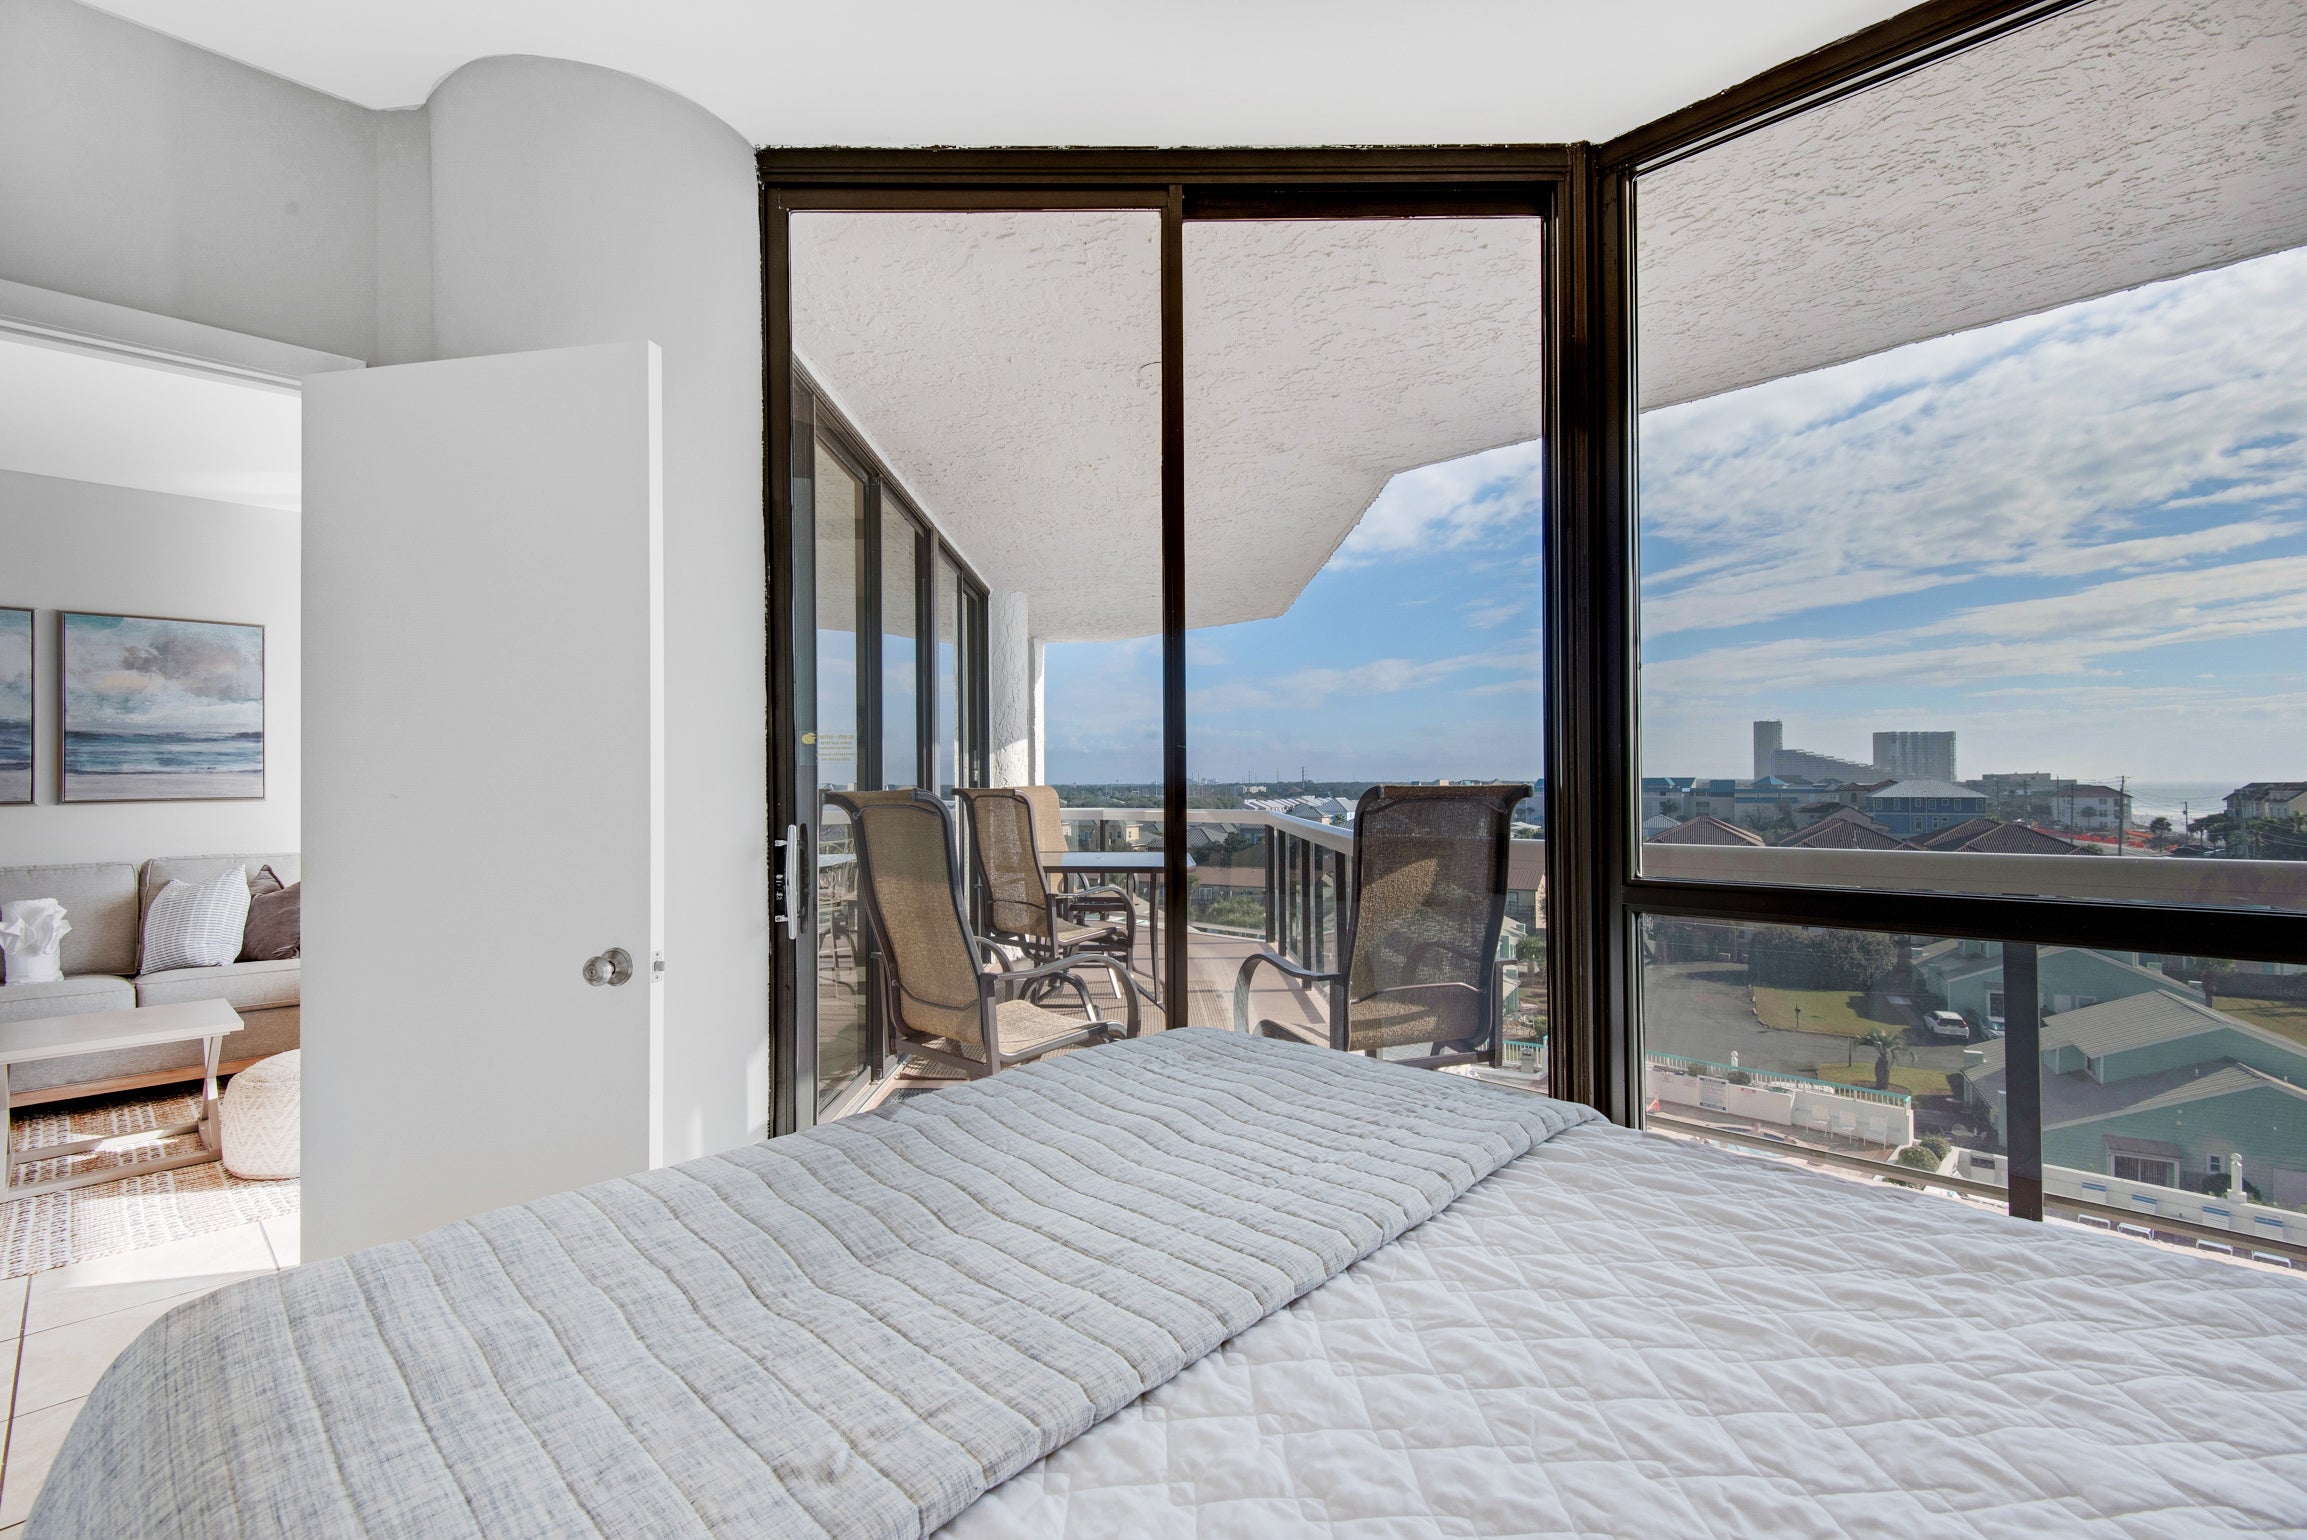 Guest bedroom with a great view